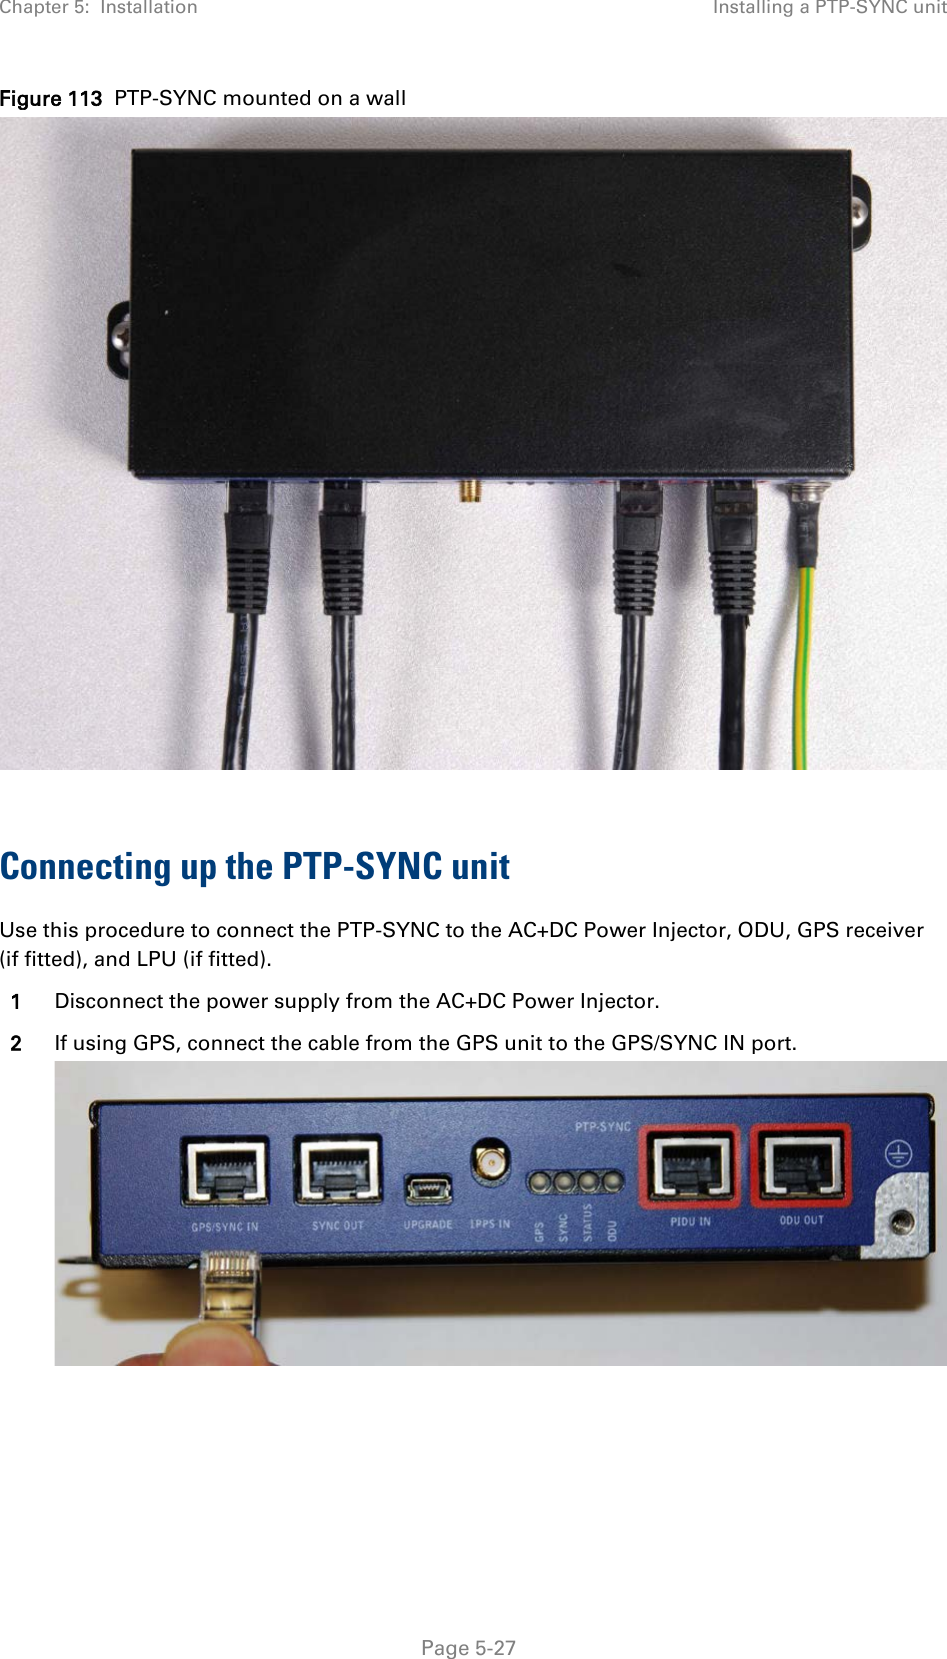 Chapter 5:  Installation Installing a PTP-SYNC unit  Figure 113  PTP-SYNC mounted on a wall   Connecting up the PTP-SYNC unit Use this procedure to connect the PTP-SYNC to the AC+DC Power Injector, ODU, GPS receiver (if fitted), and LPU (if fitted). 1 Disconnect the power supply from the AC+DC Power Injector. 2 If using GPS, connect the cable from the GPS unit to the GPS/SYNC IN port.   Page 5-27 